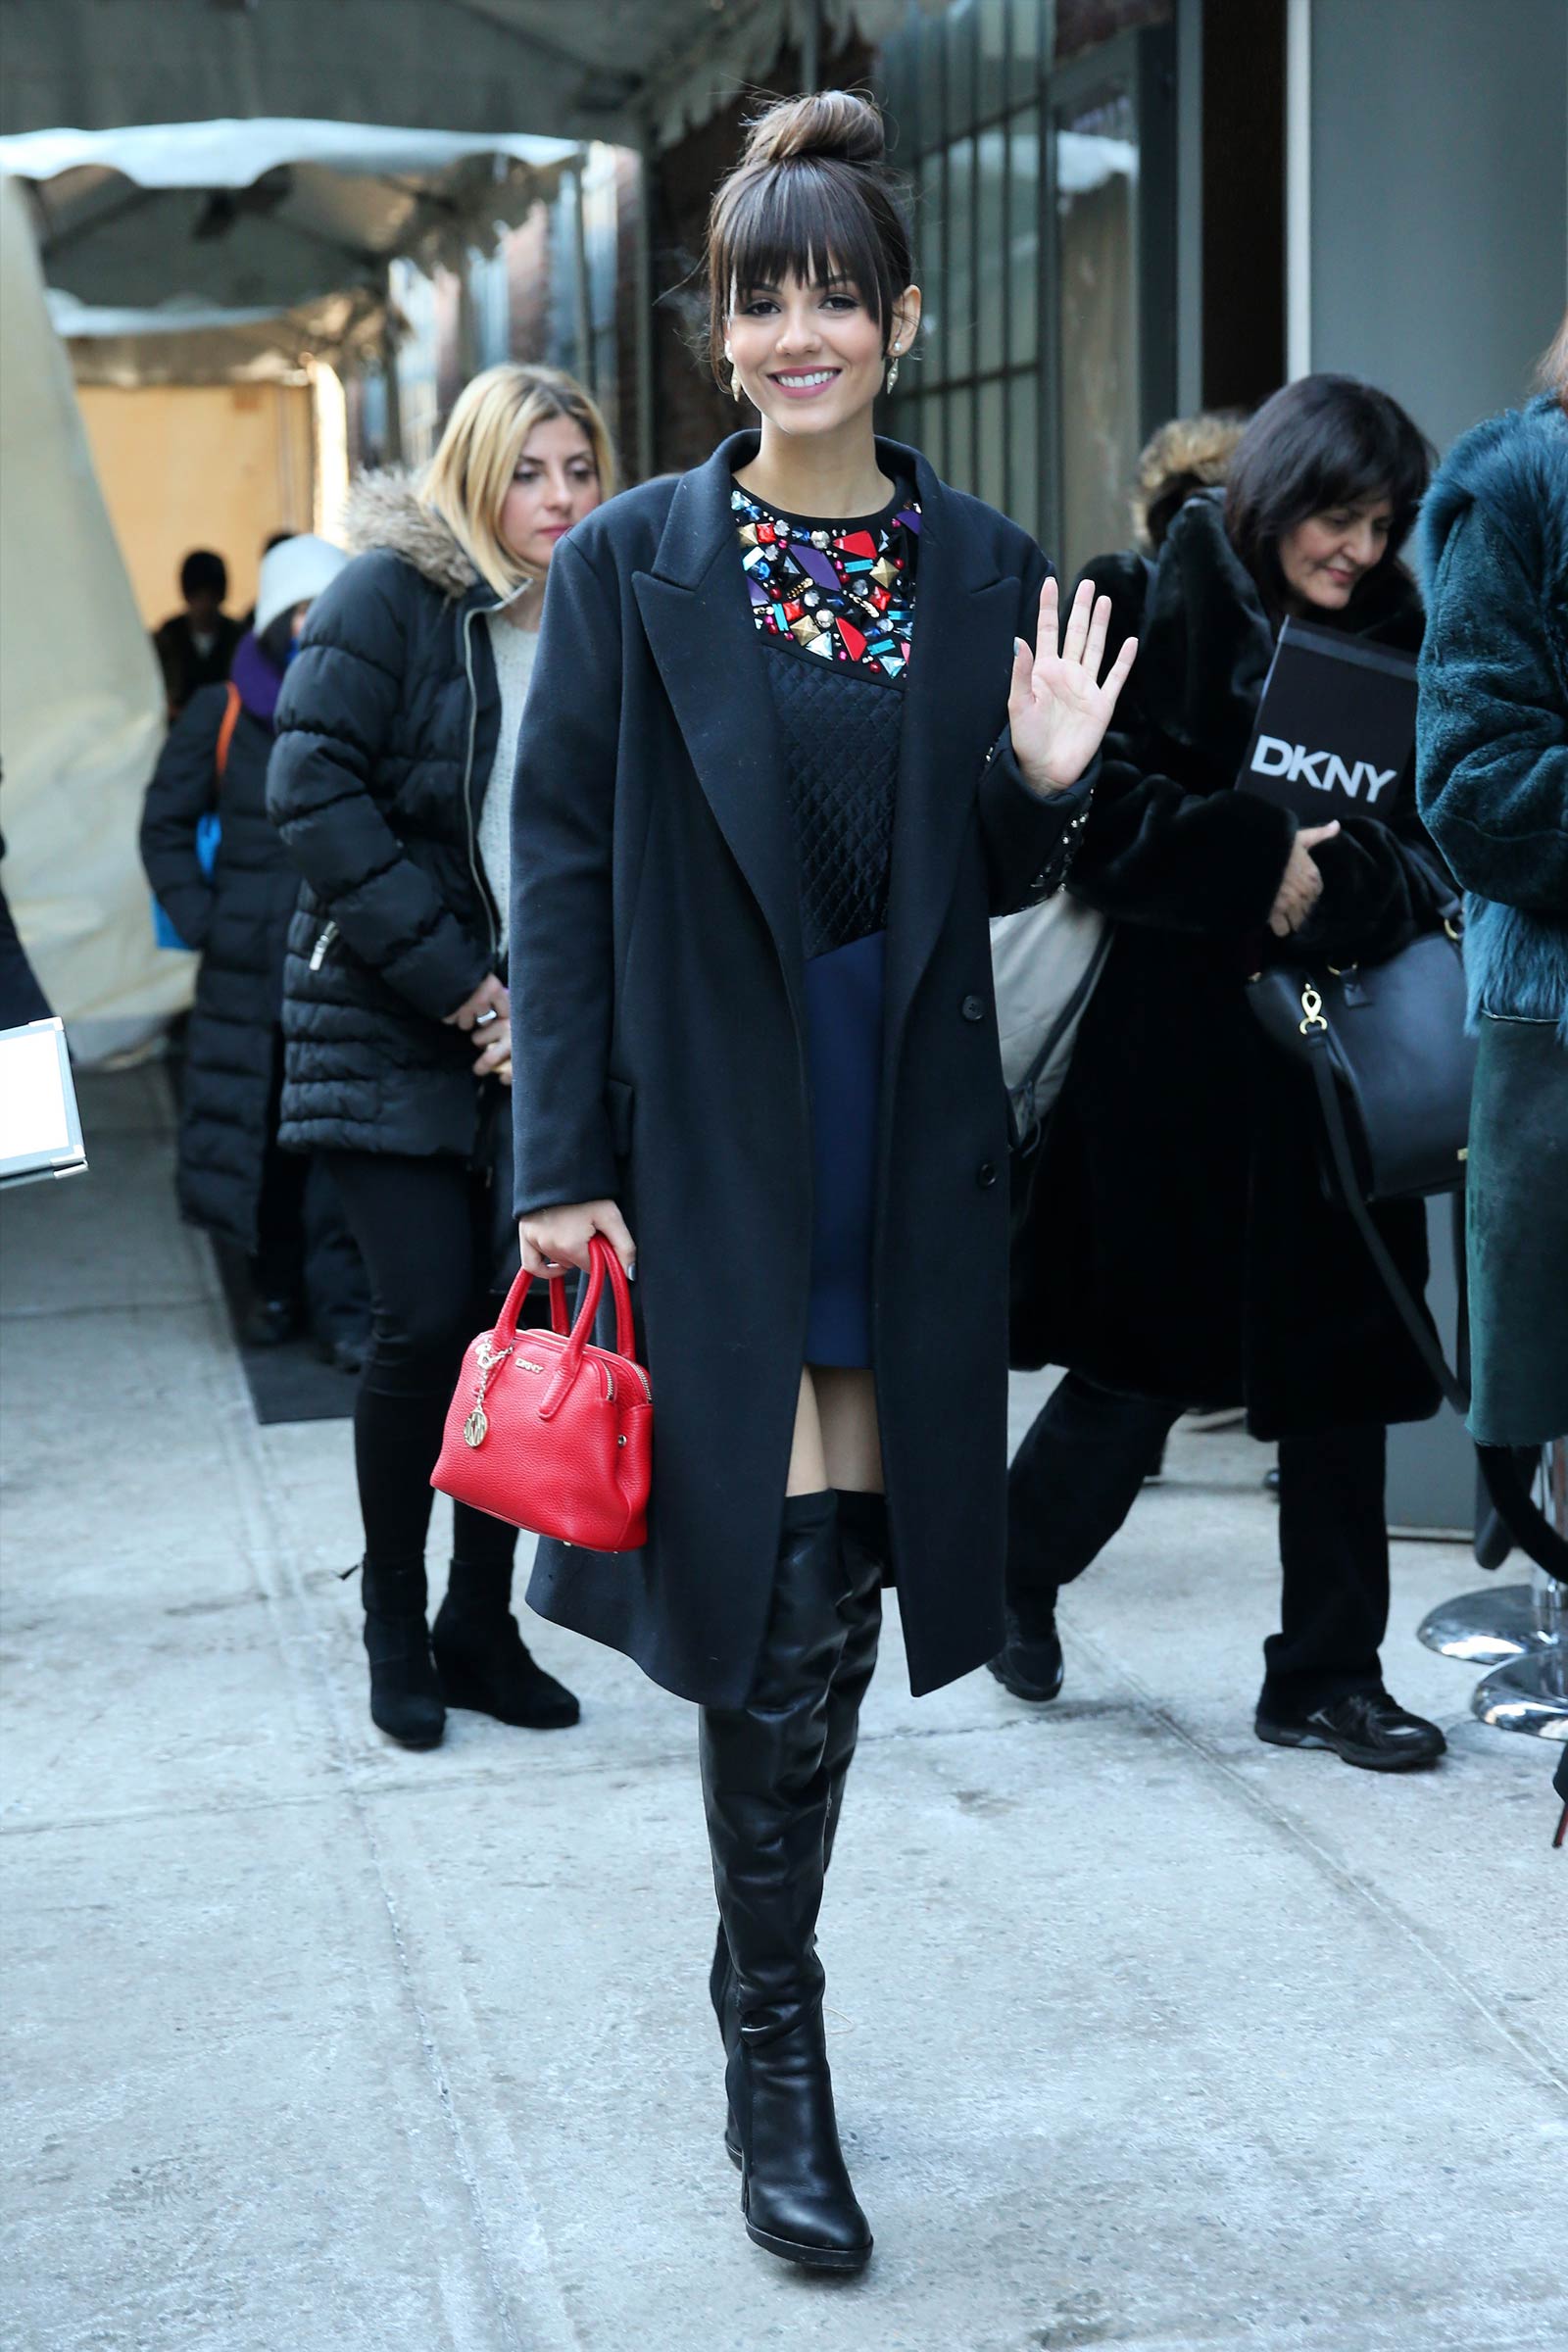 Victoria Justice attends DKNY Fashion Show